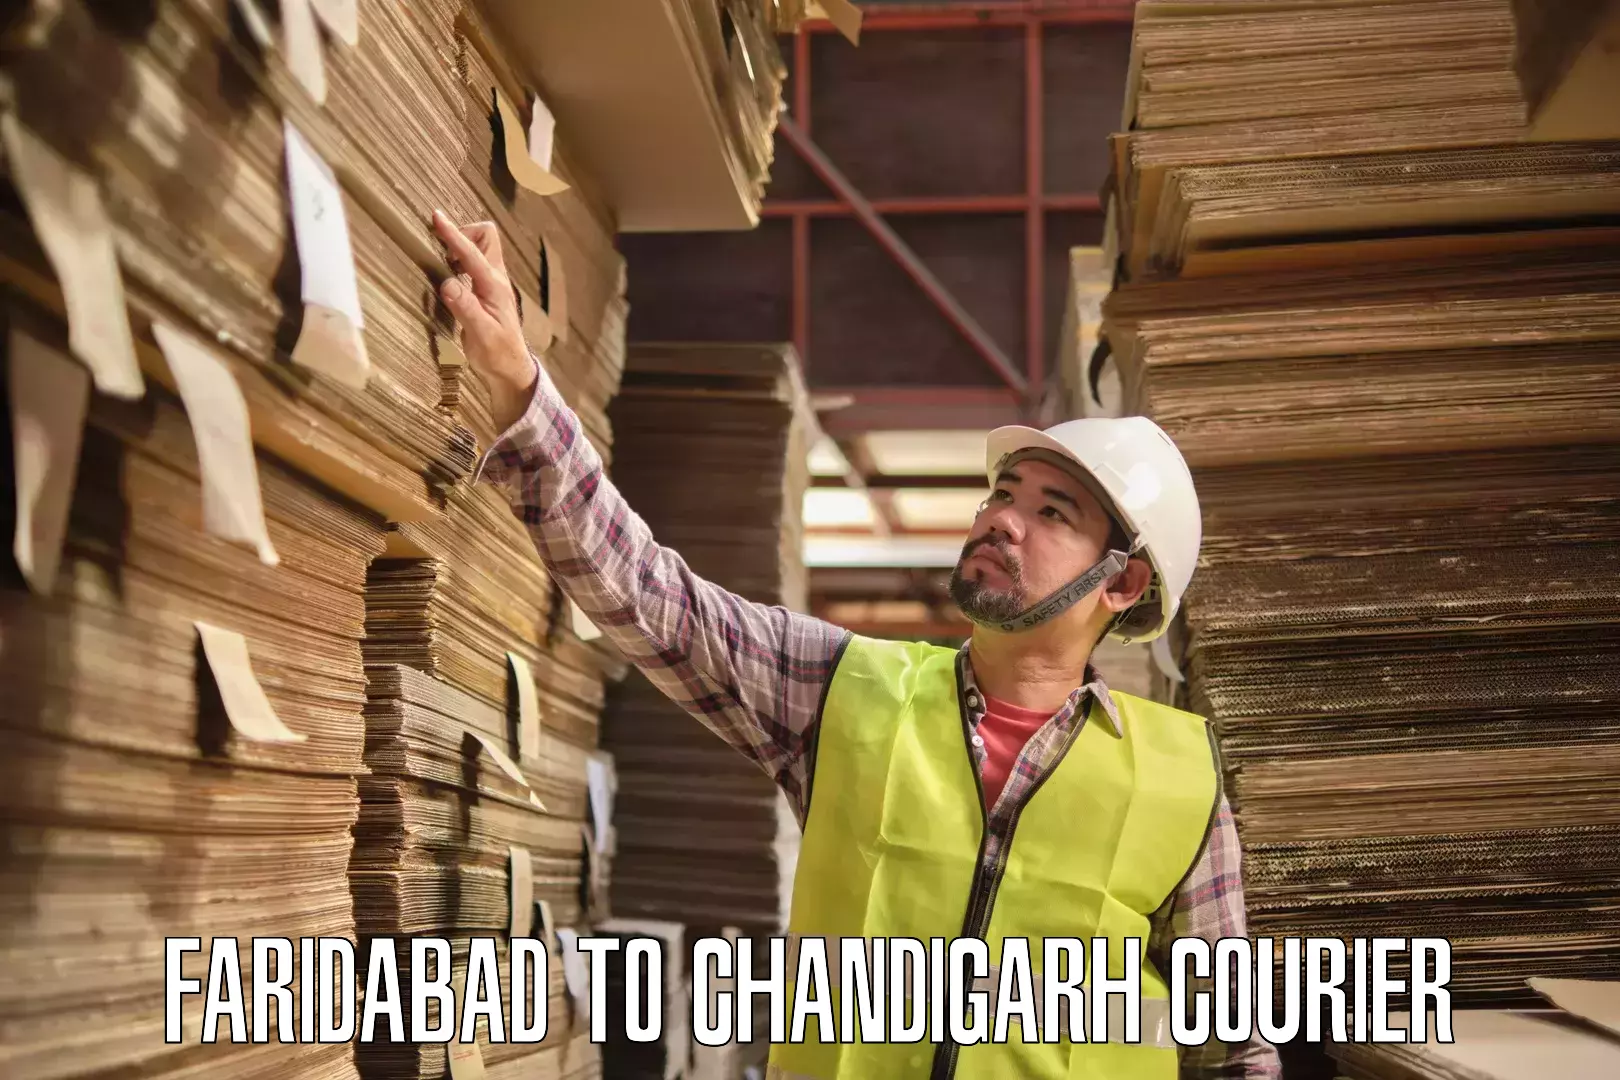 Advanced delivery network Faridabad to Chandigarh